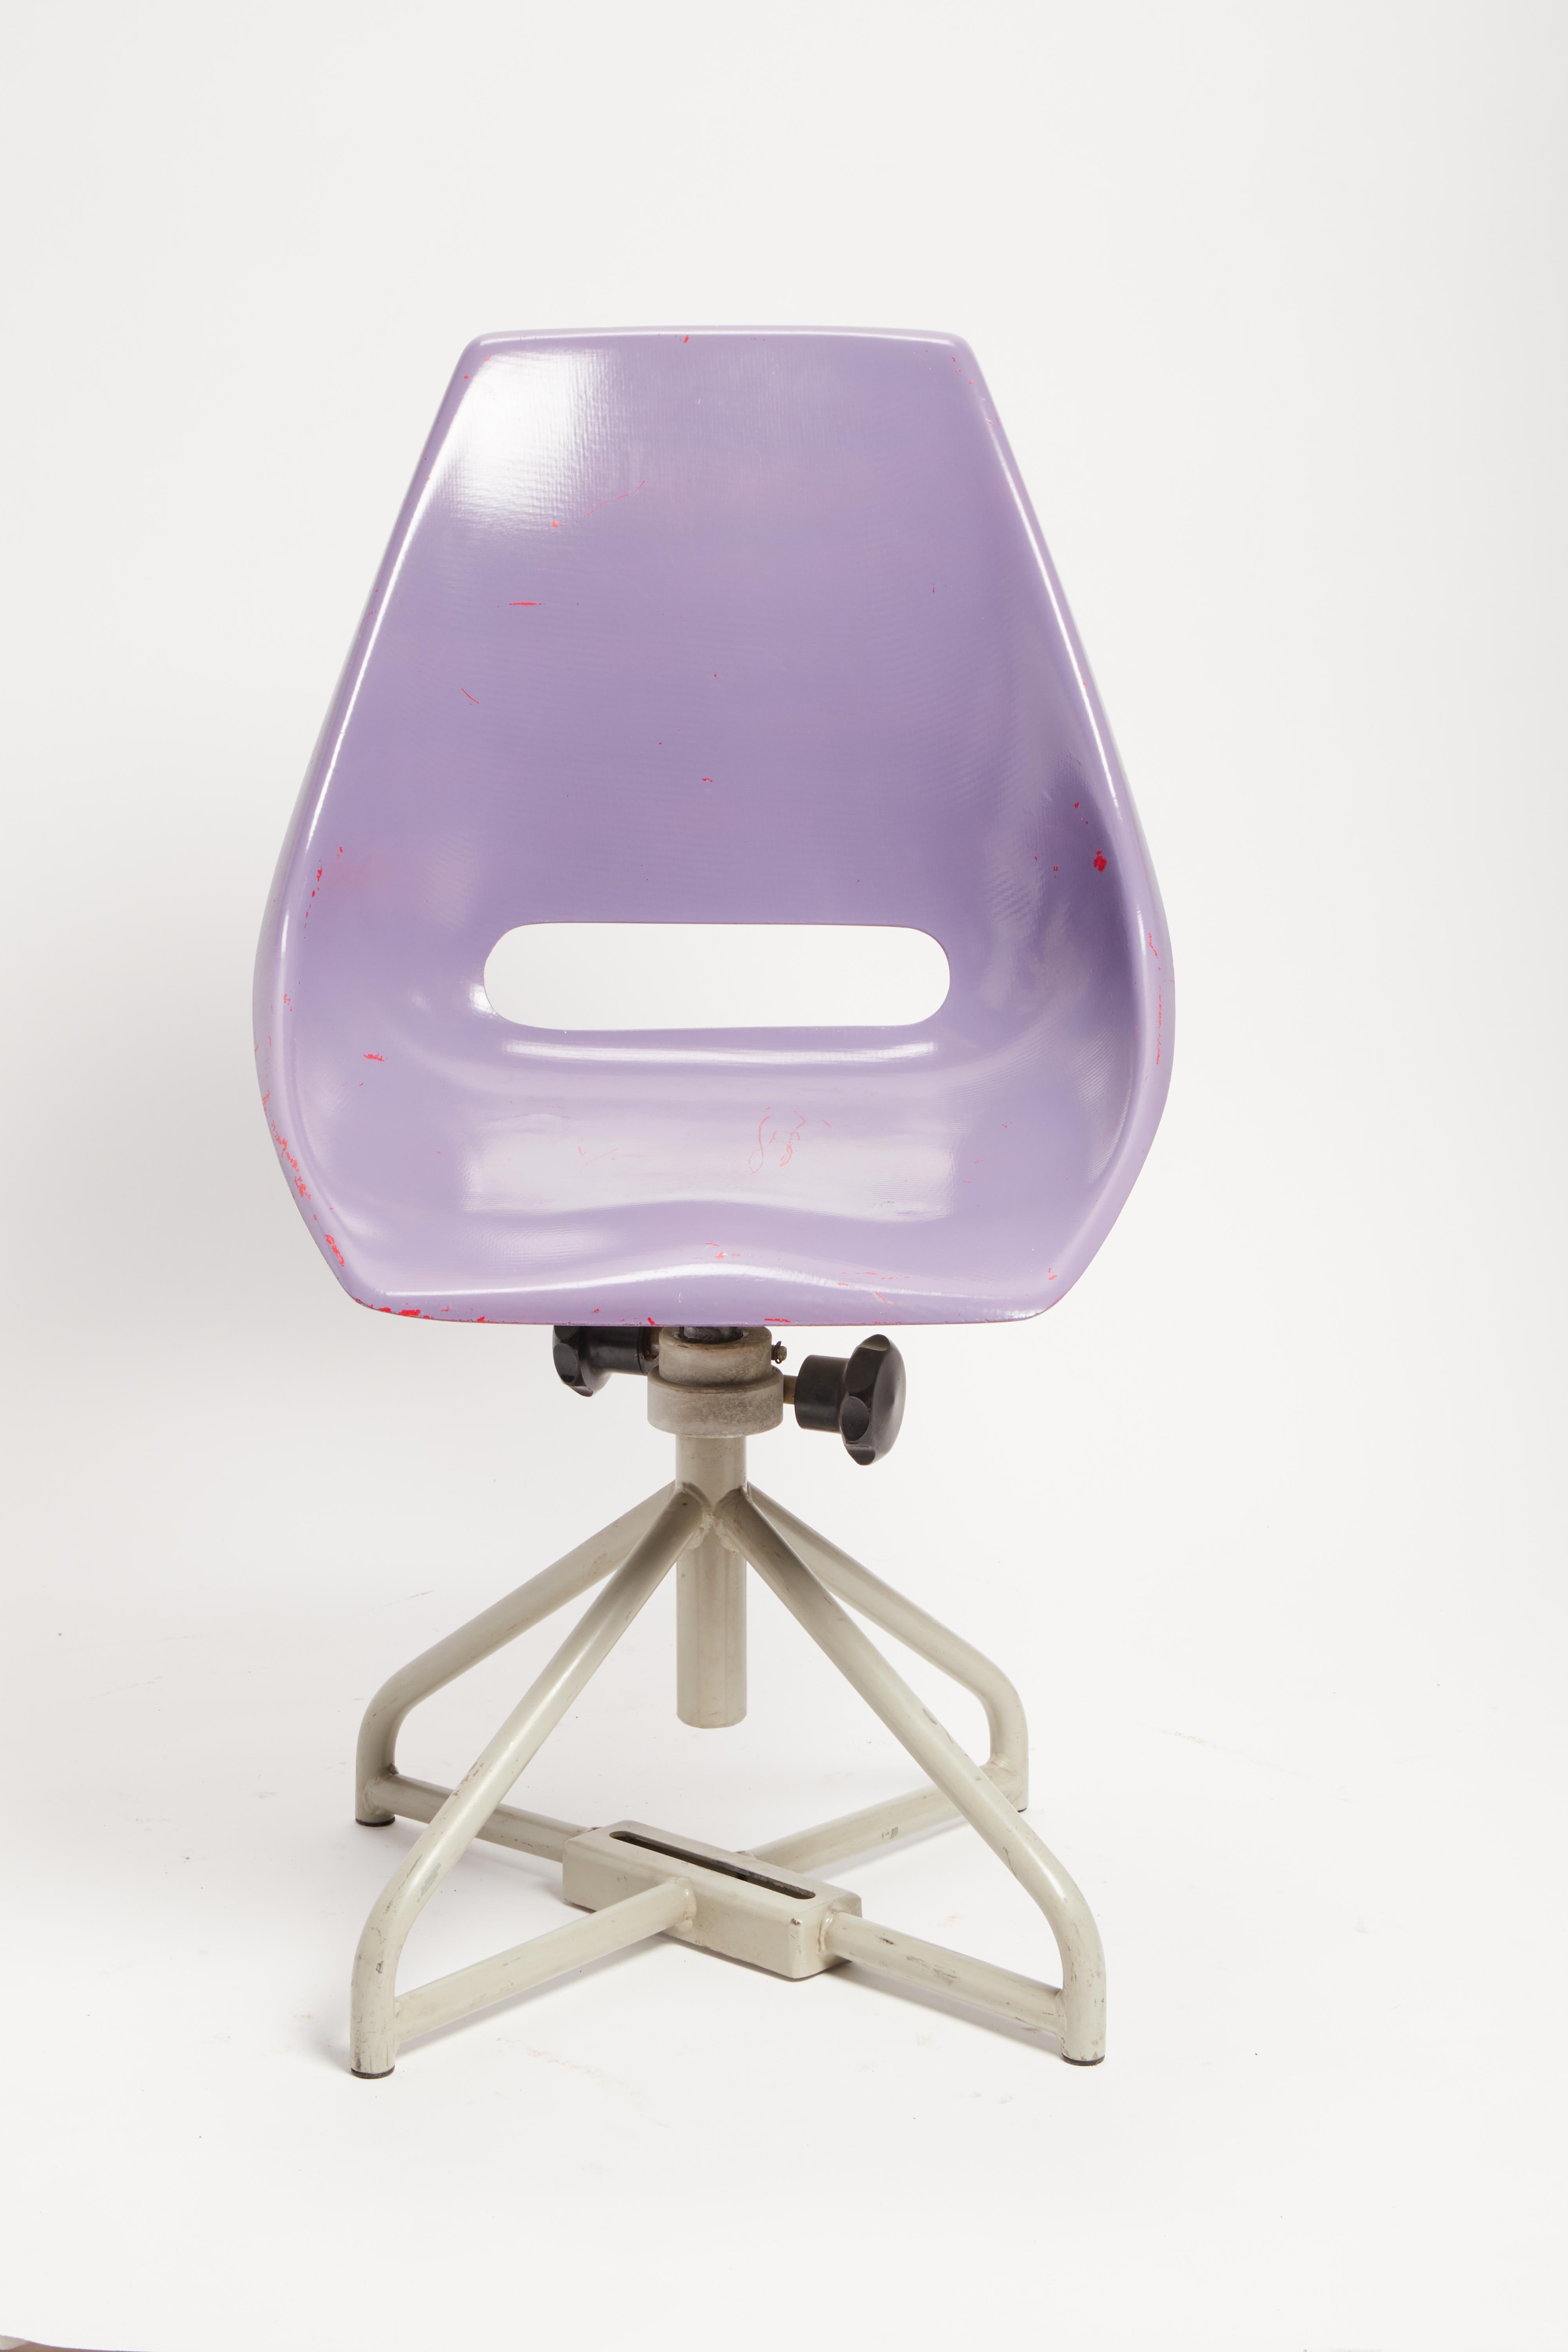 Mid-20th Century Multicolor Adjustable Fiberglass Chairs, Italy, 1950 For Sale